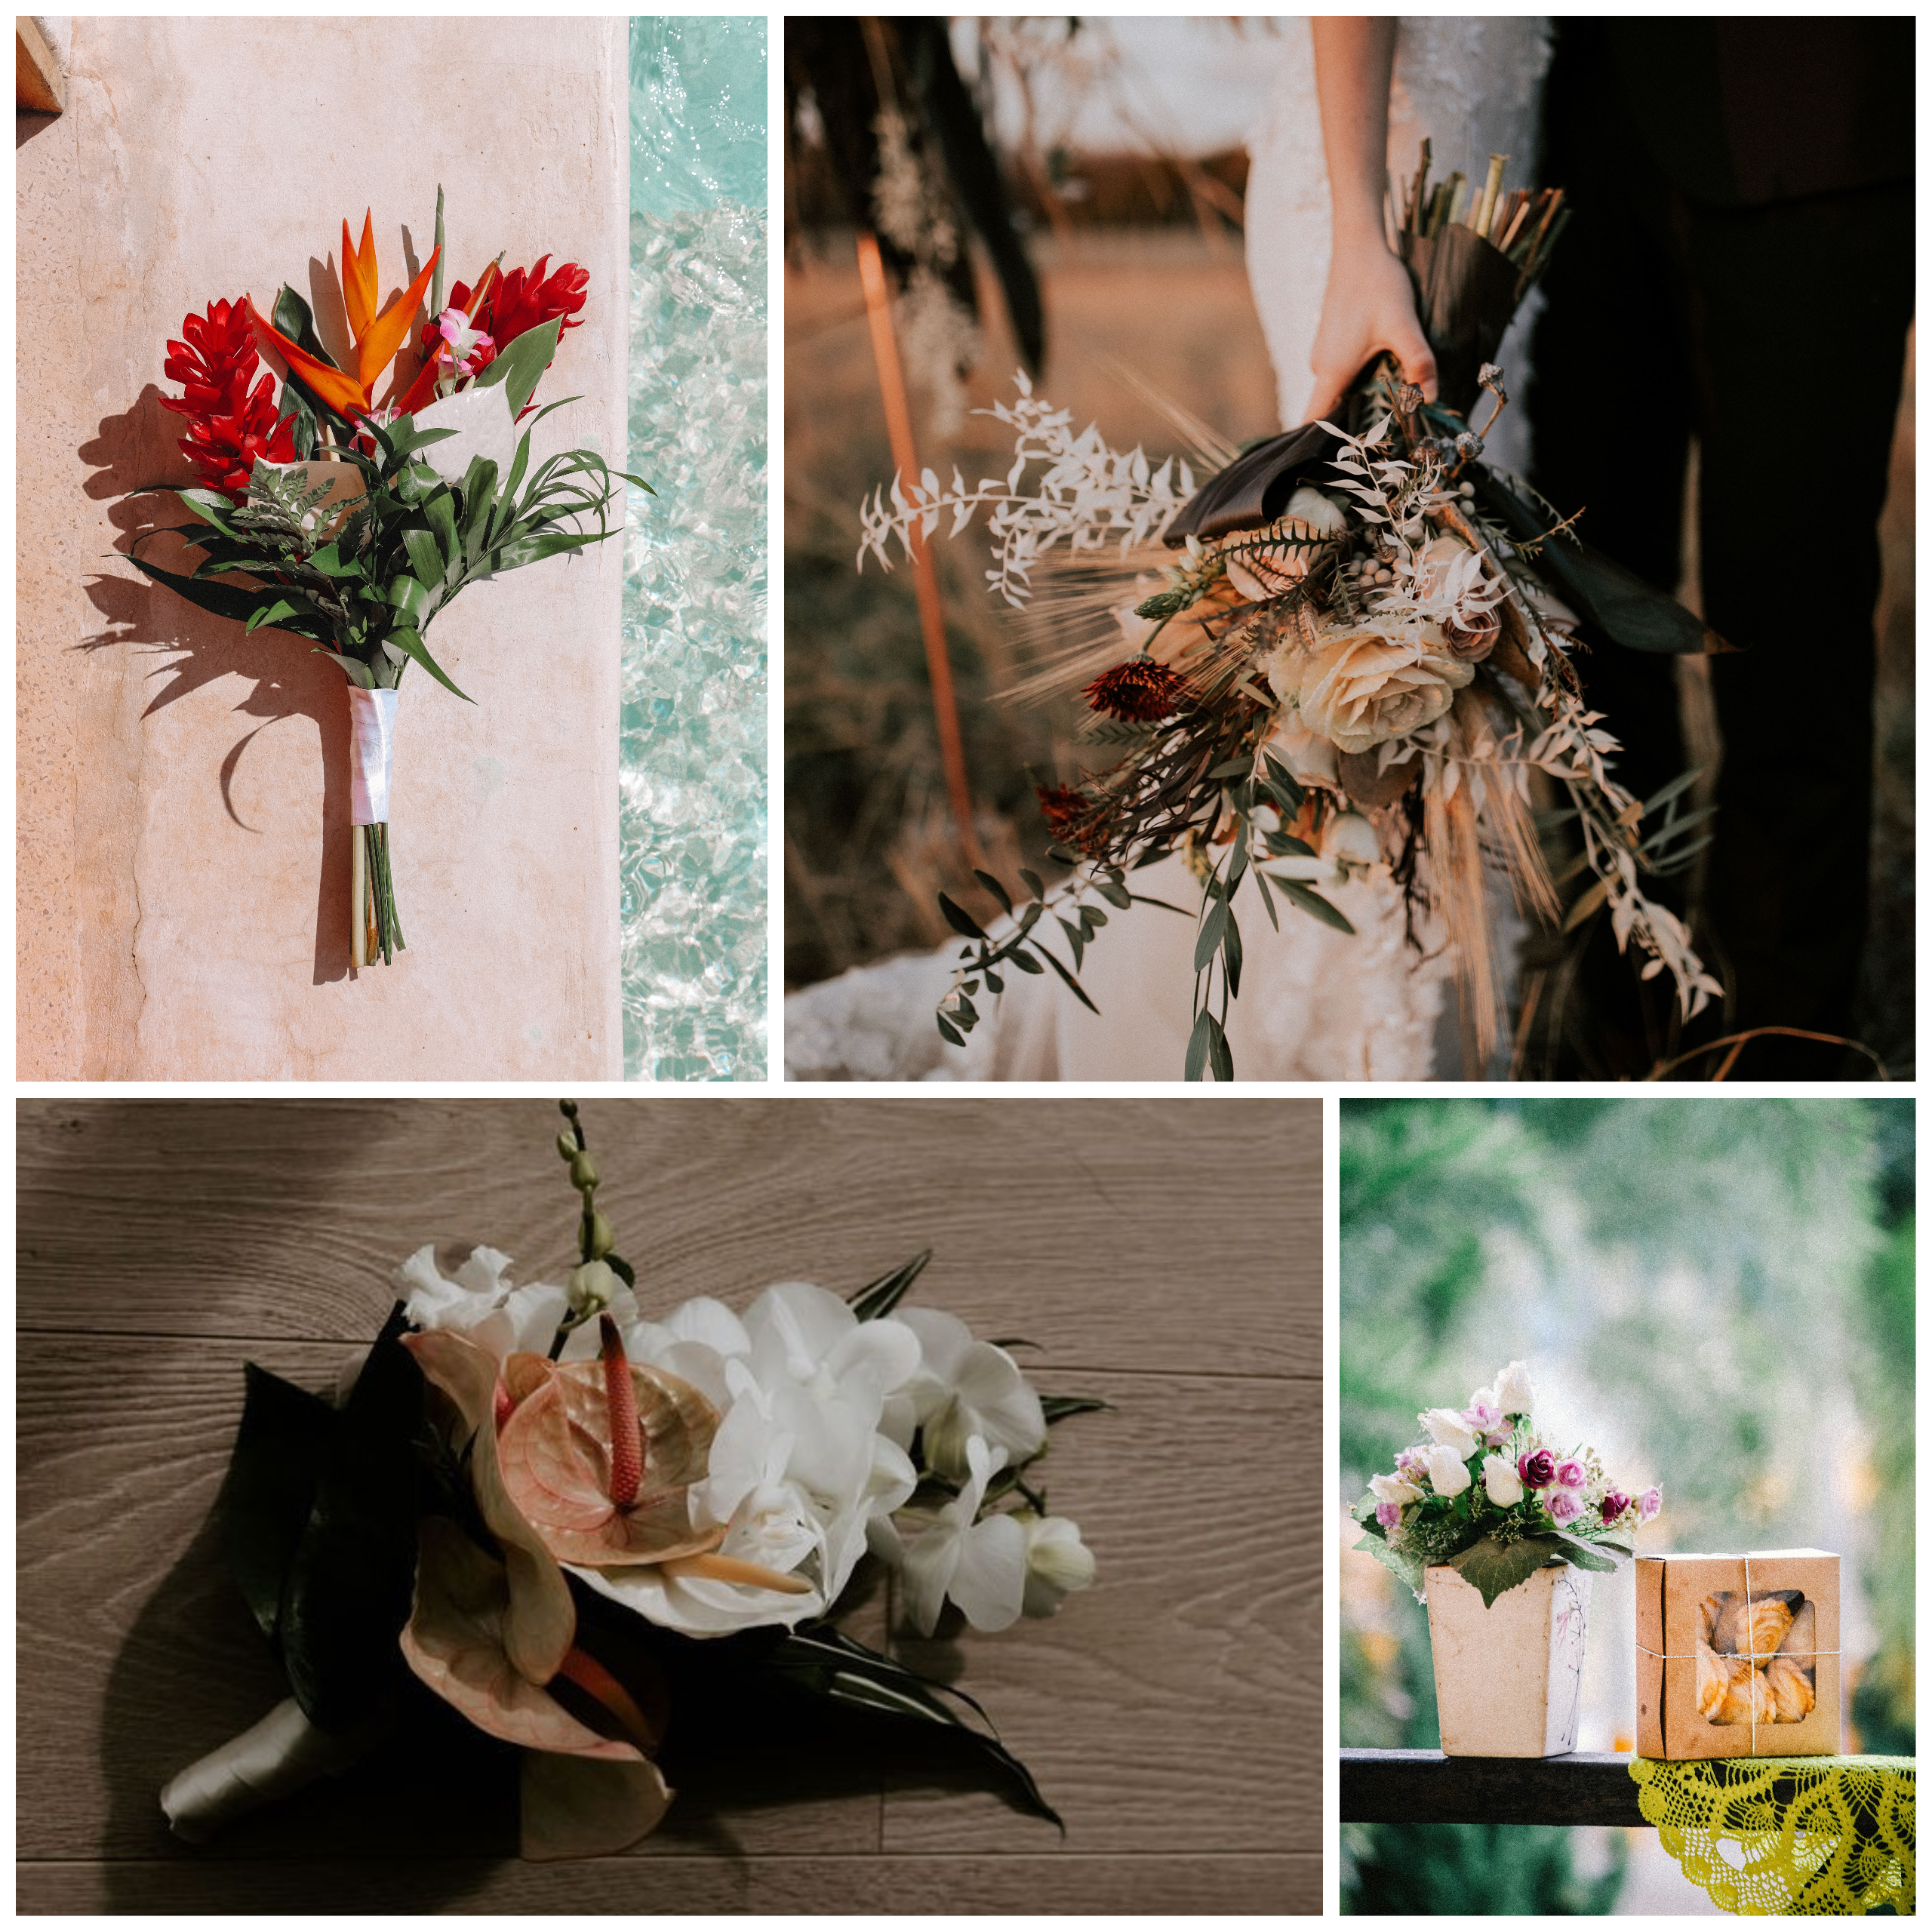 Picture 1: Wedding Inspo by WSW | Picture 2: Photo by Hannah Busing on Unsplash | Picture 3: 📸: @zemanandco | Picture 4: Photo by Kawin Harasai on unsplash